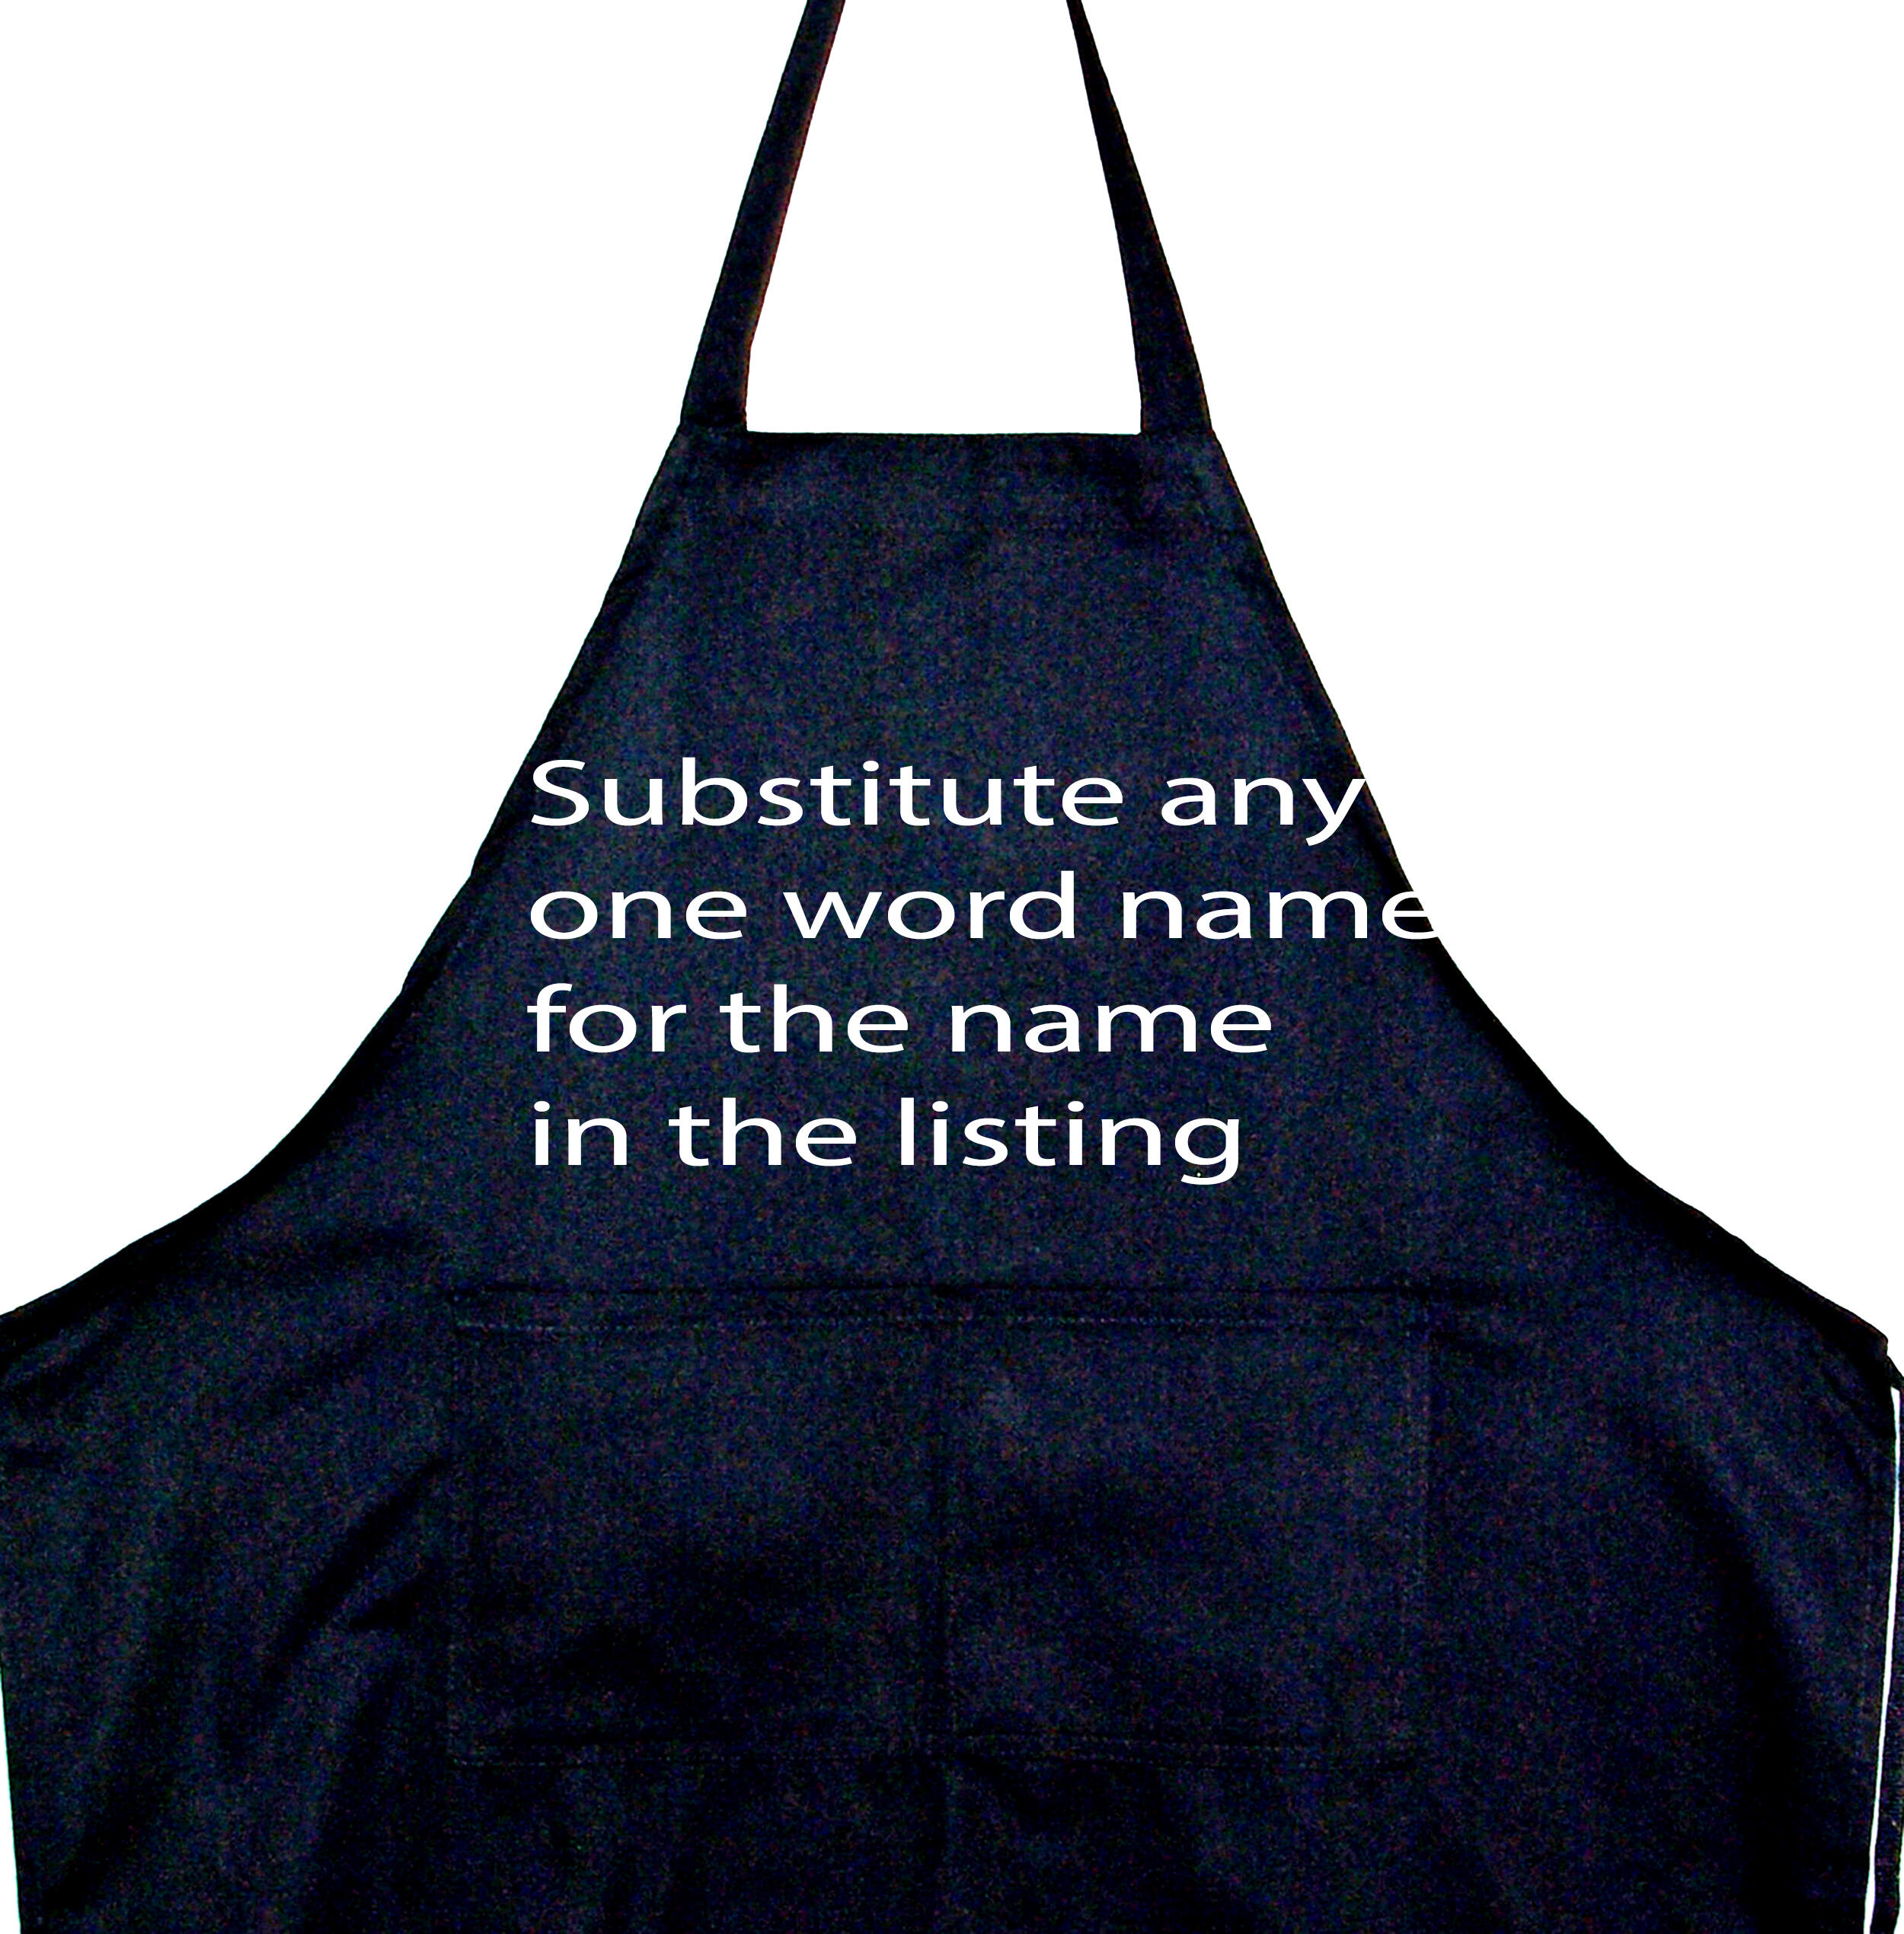 https://d1q8o8ch5u48ua.cloudfront.net/images/detailed/230/black_blank_apron_sub_any_name_for_lsisting_pzrw-xz.jpg?t=1632057774